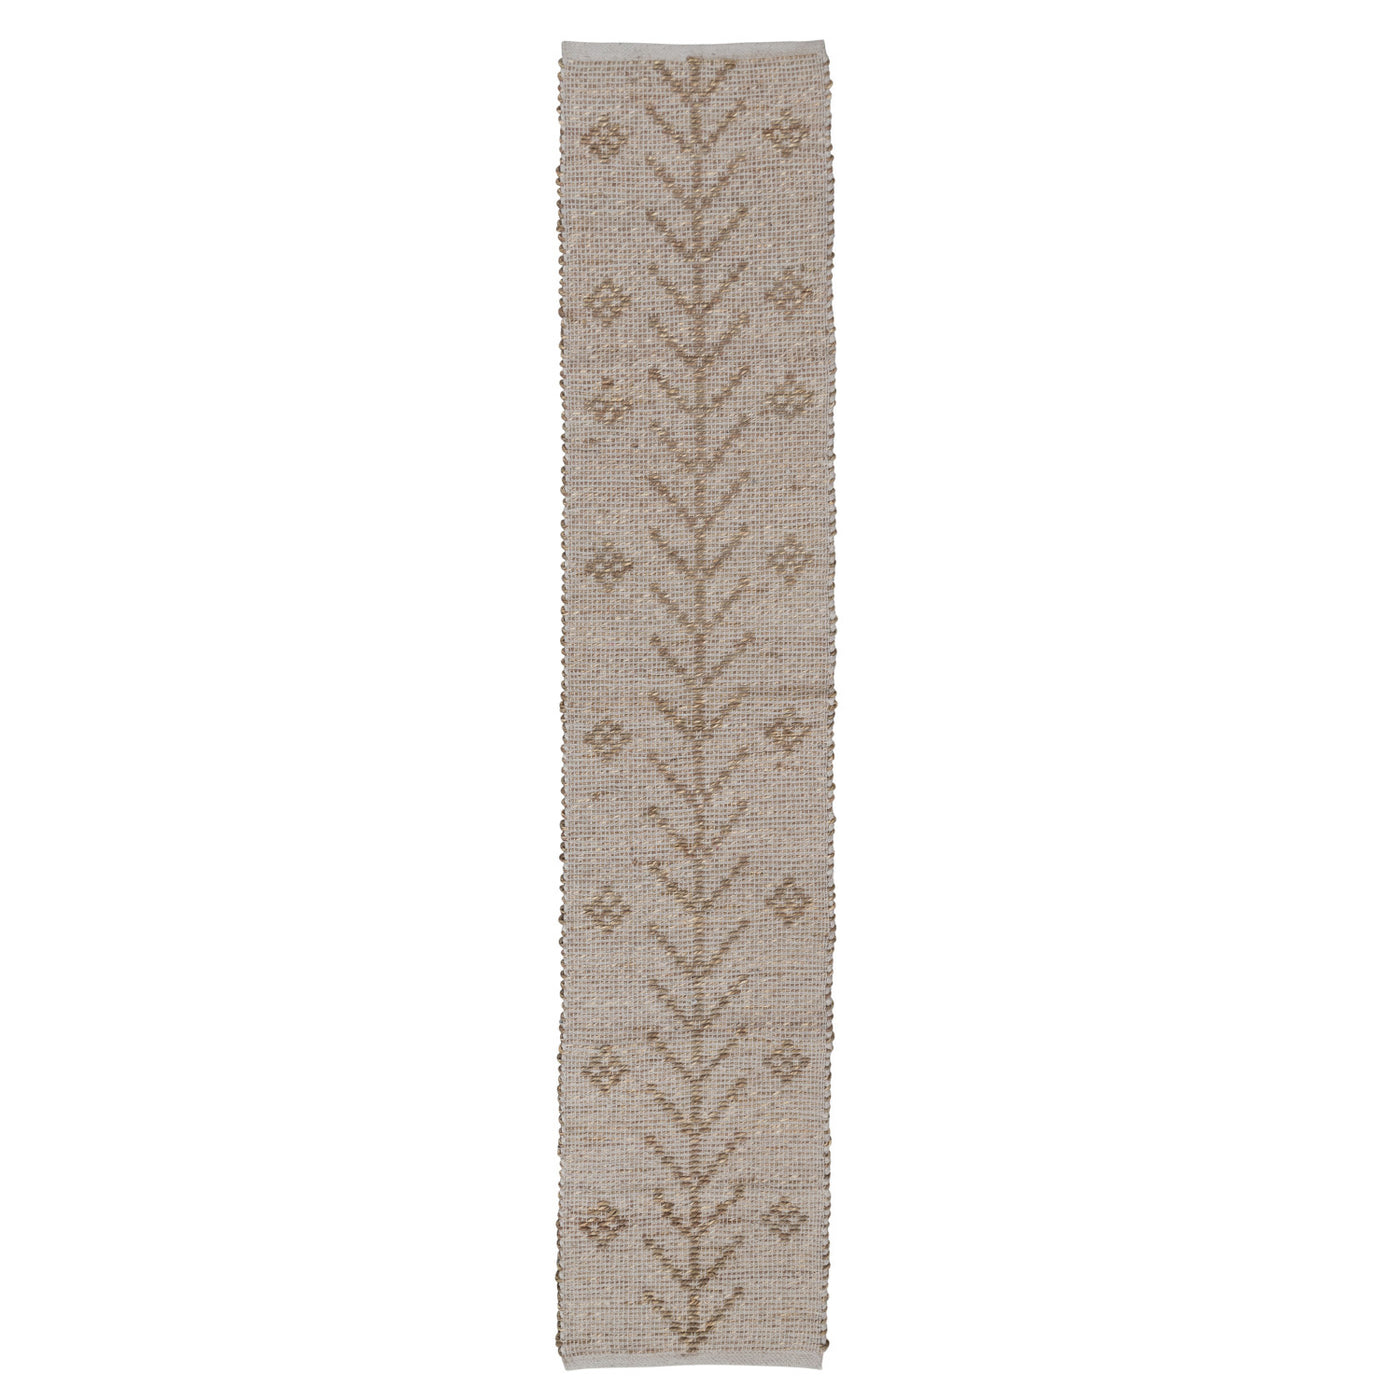 Two-Sided Hand-Woven Seagrass & Cotton Table Runner